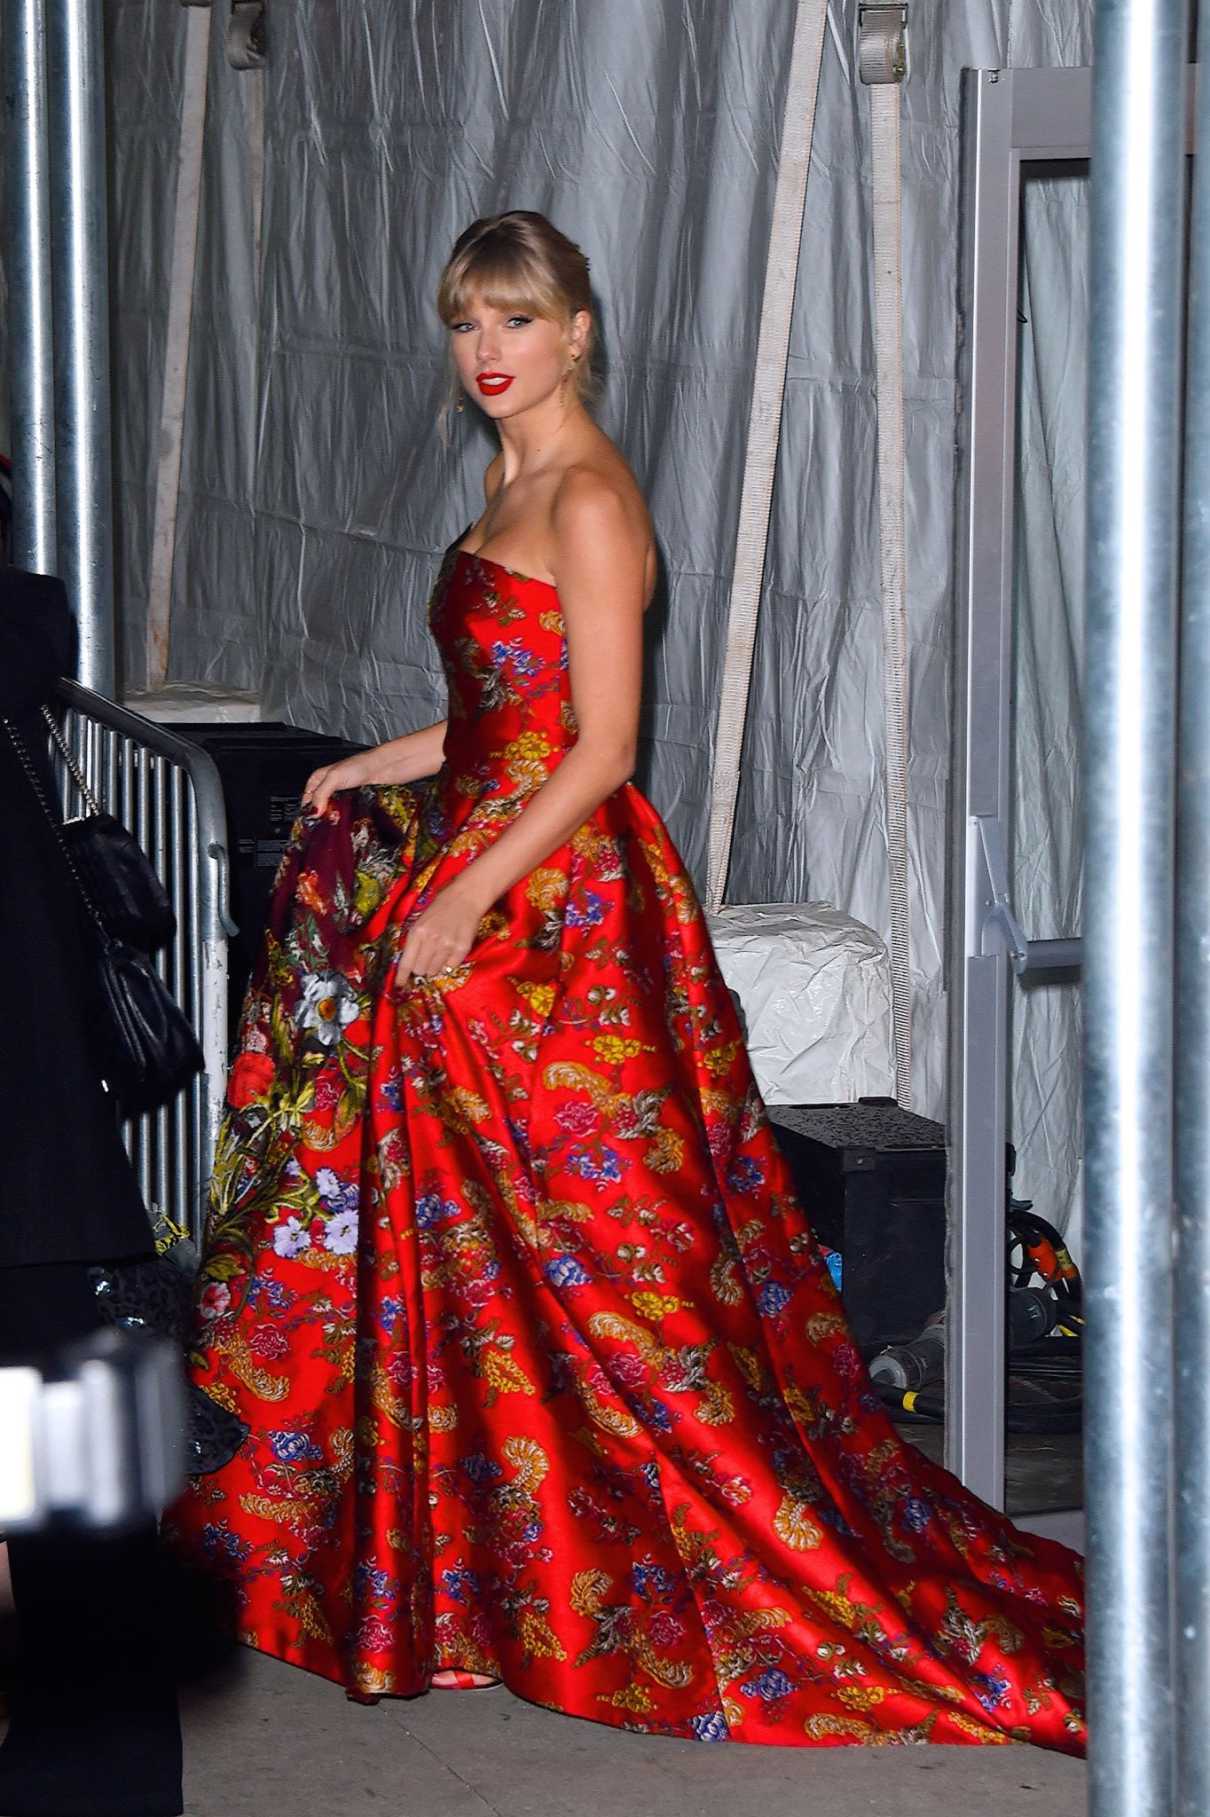 Taylor Swift in a Red Floral Dress